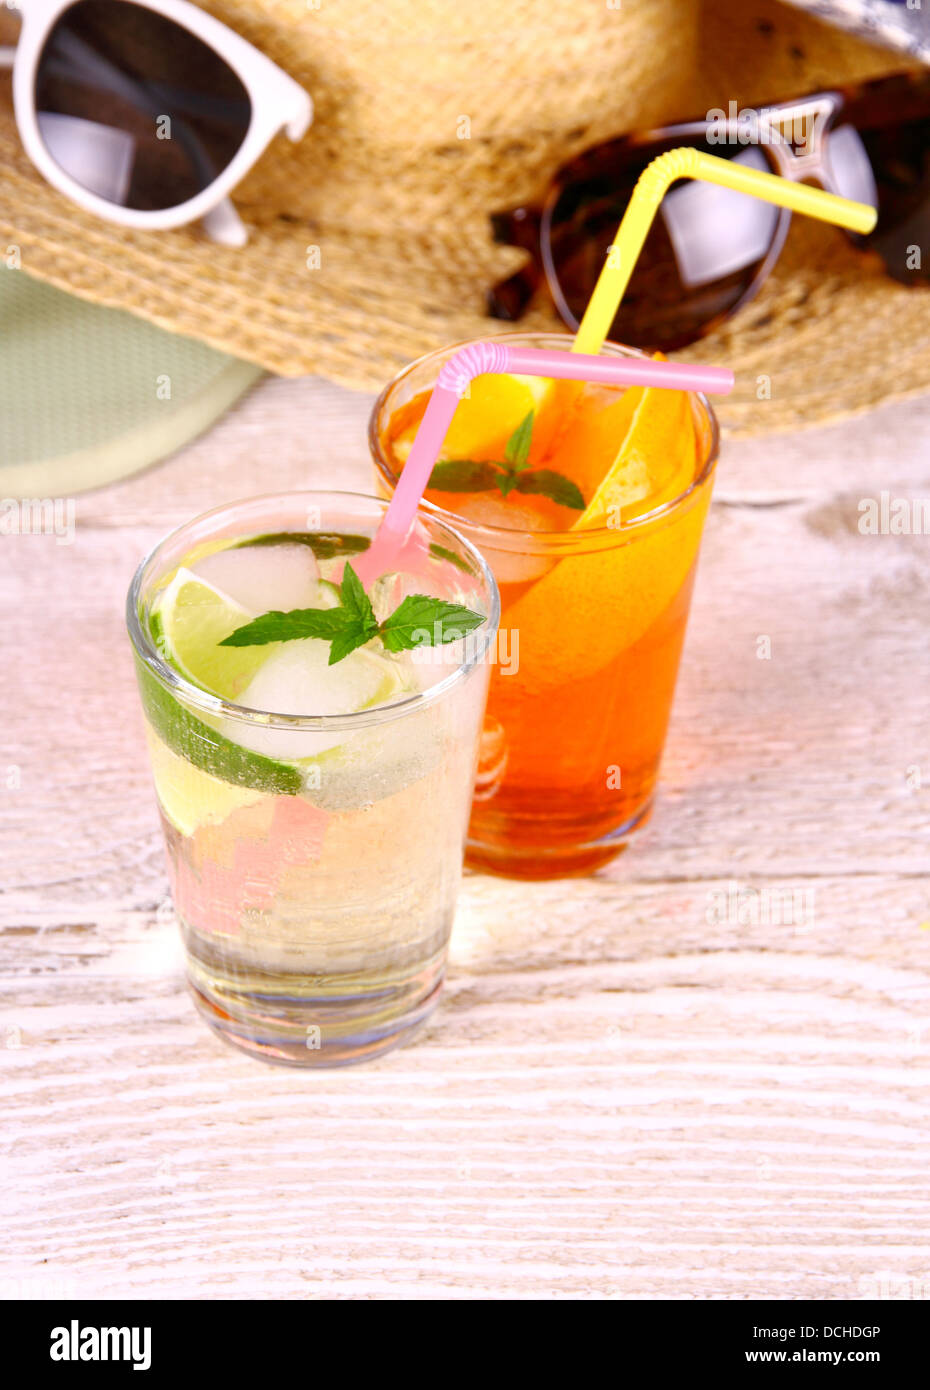 Grenn, orange cocktails with straw and holiday background, close up Stock Photo